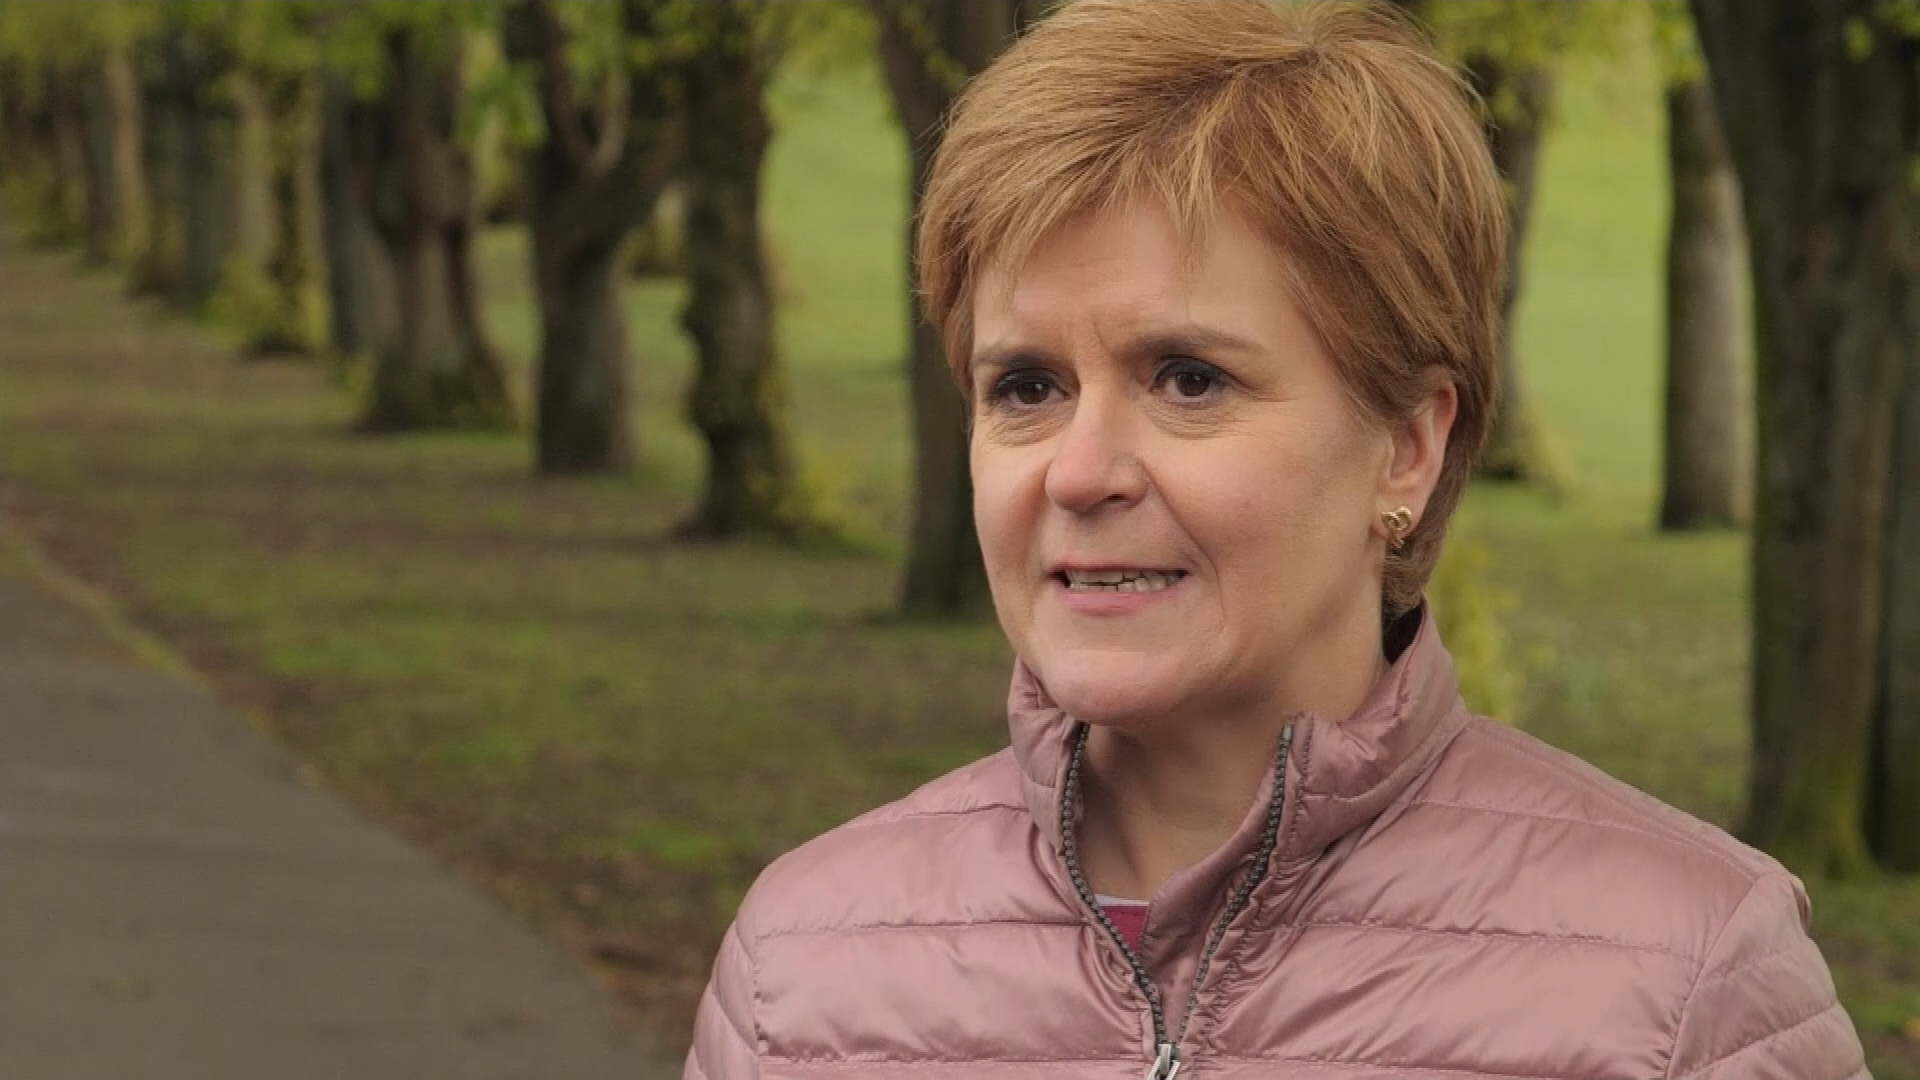 Nicola Sturgeon describes Scottish election as 'most important in our lifetime'  | ITV News